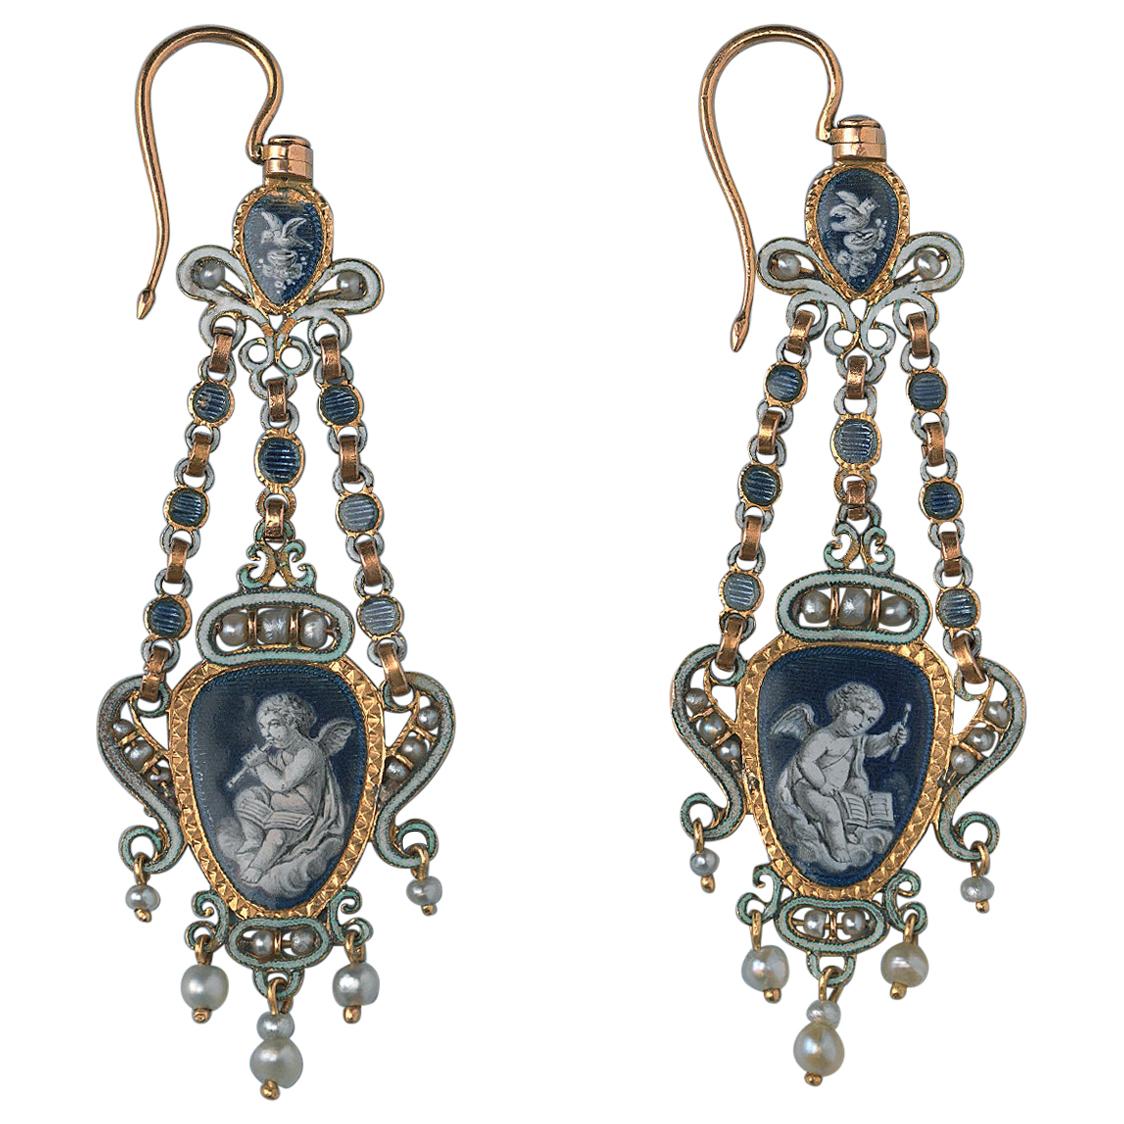 Pair of 18 Carat Gold Double Sided Earrings with Enamel and Pearls